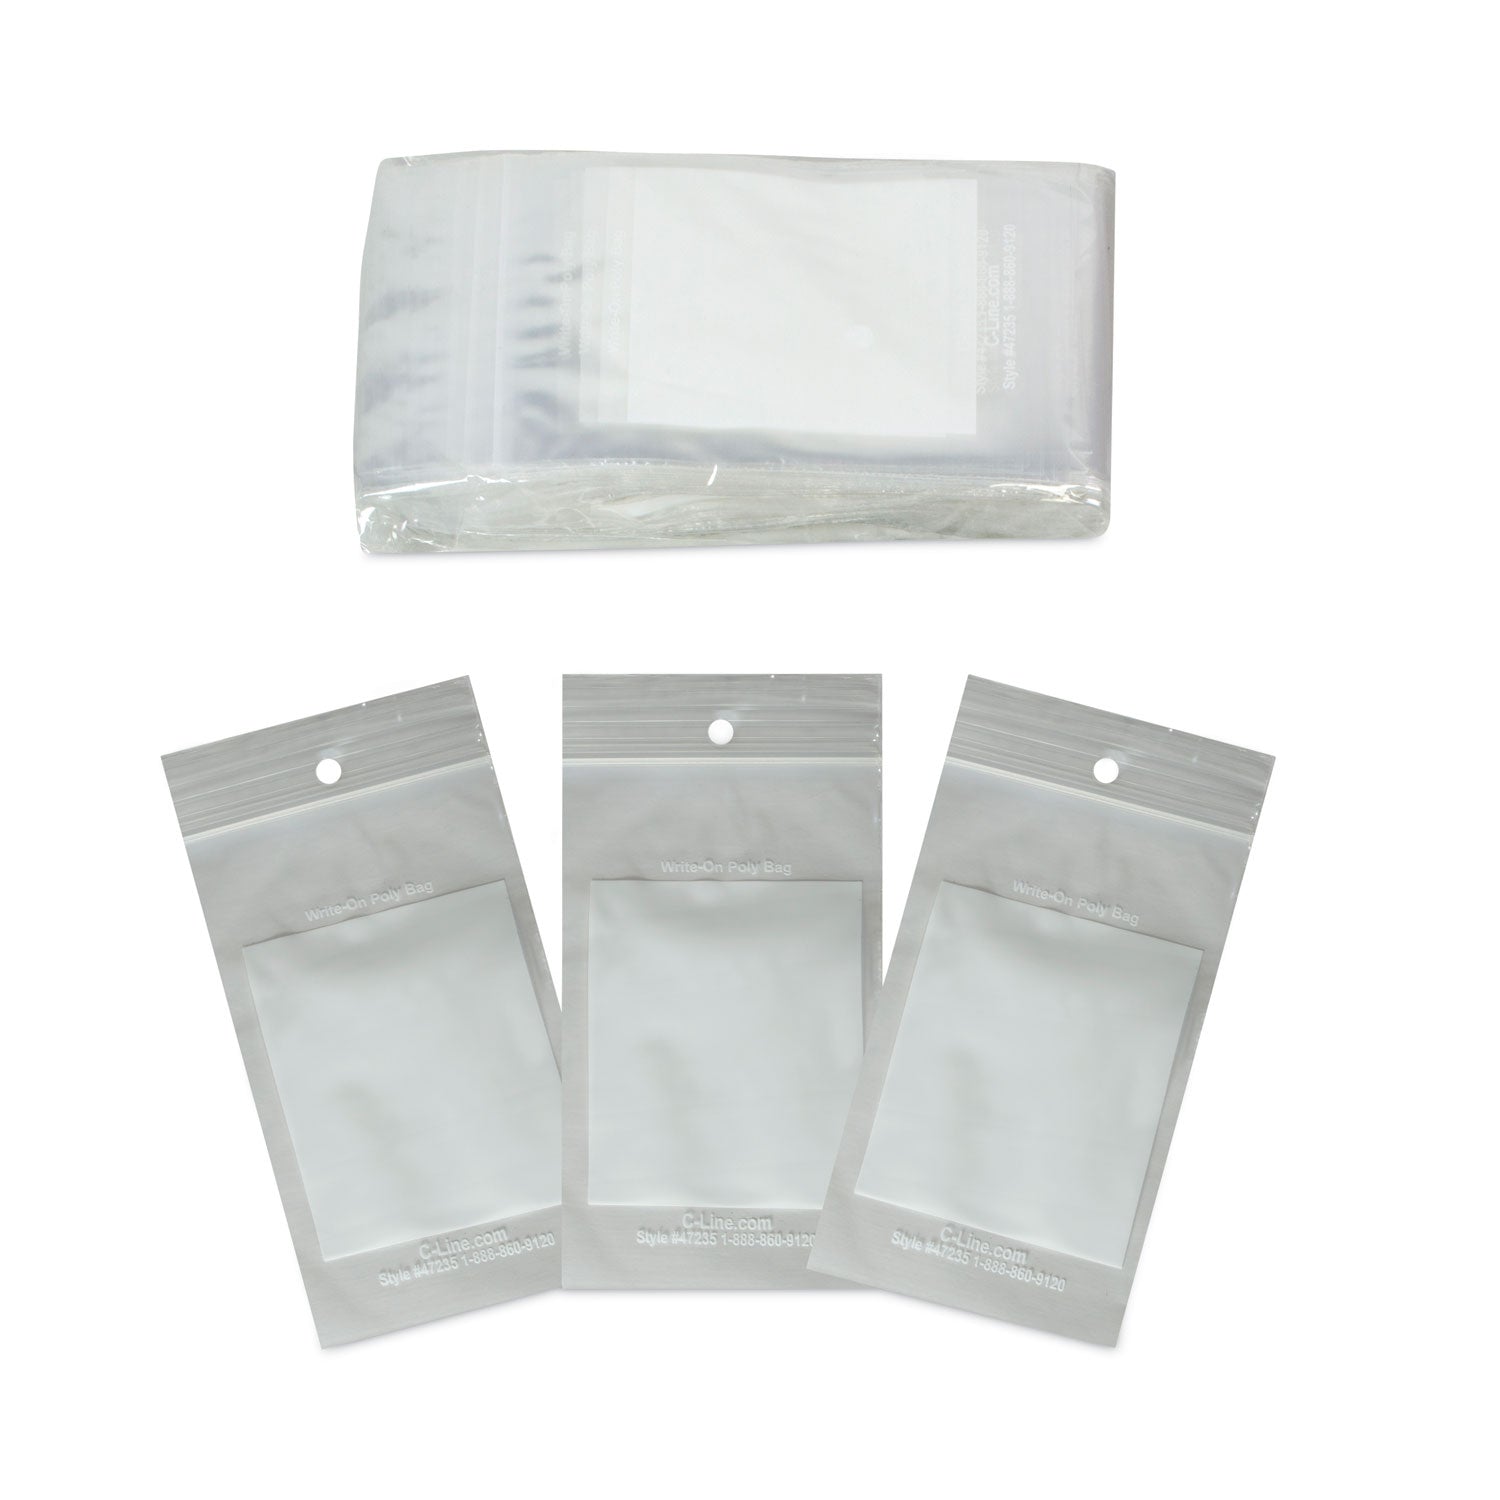 write-on-poly-bags-2-mil-3-x-5-clear-1000-carton_cli47235 - 2